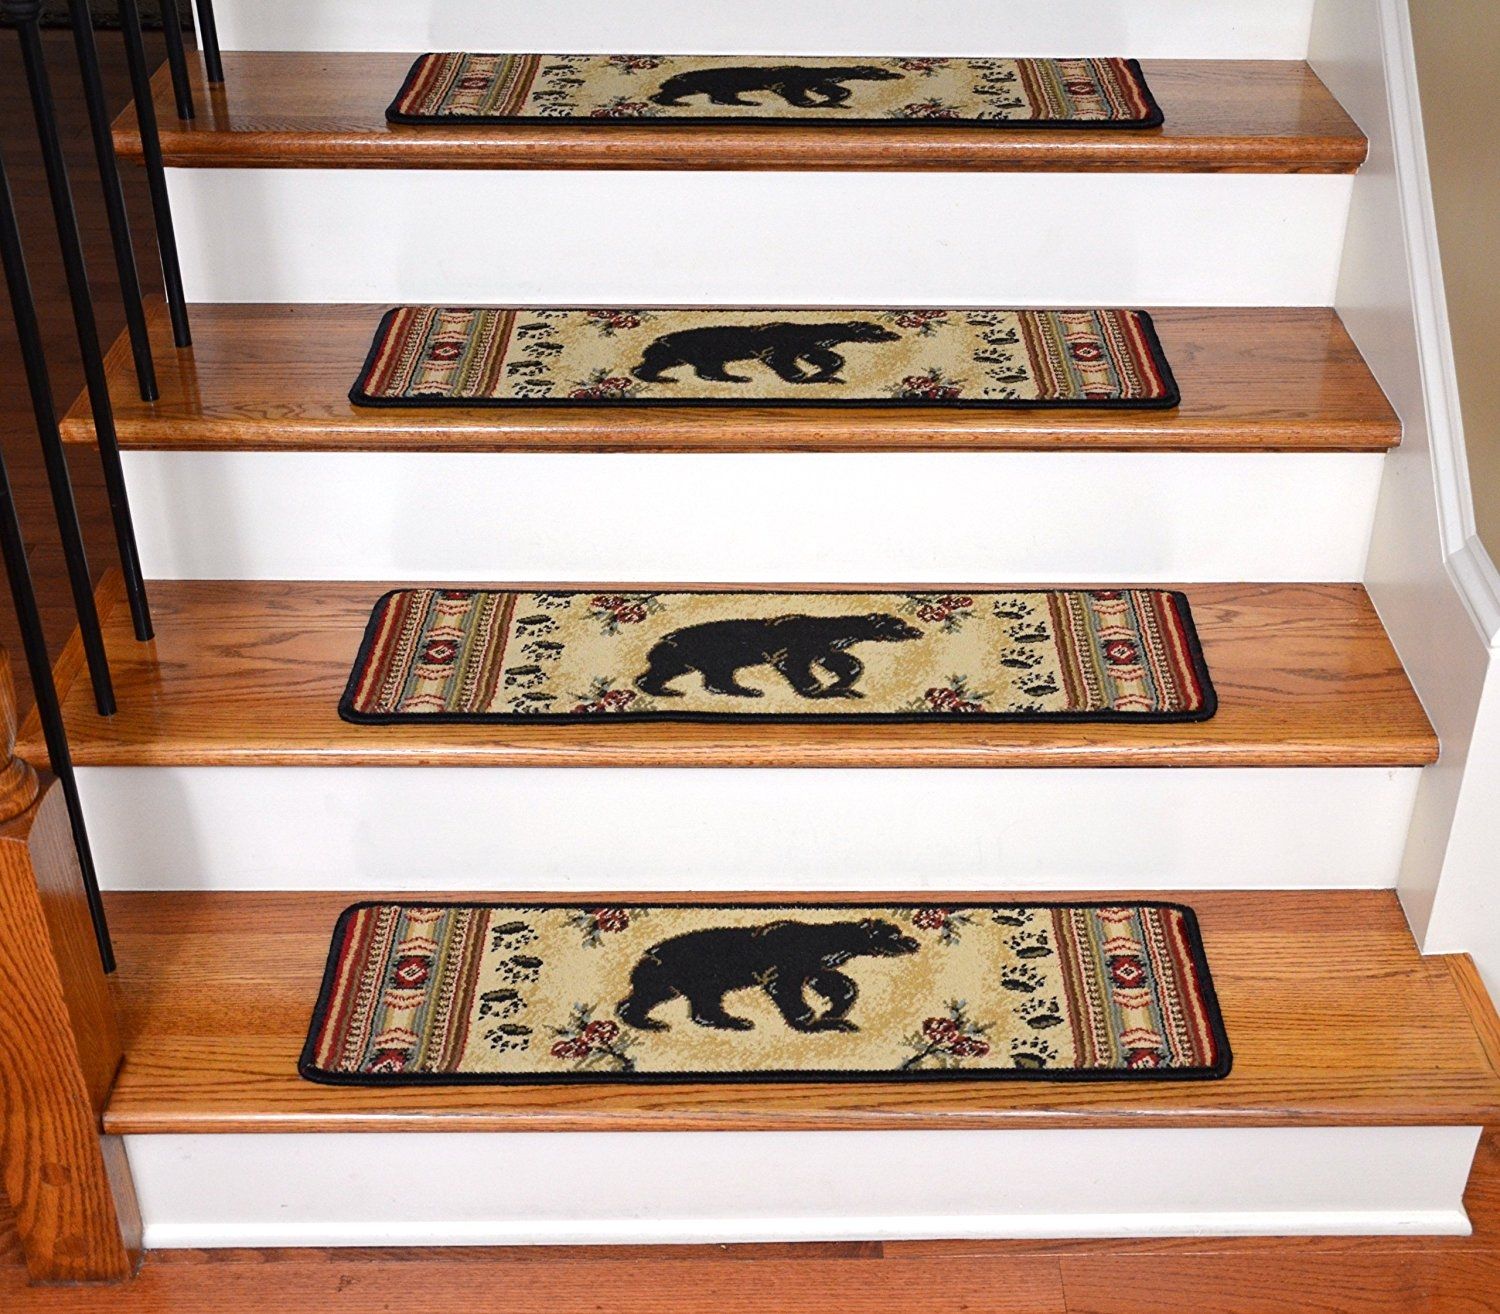 Dean Premium Carpet Stair Tread Rugs Black And Red Bear Cabin Pertaining To Premium Carpet Stair Treads (View 2 of 20)